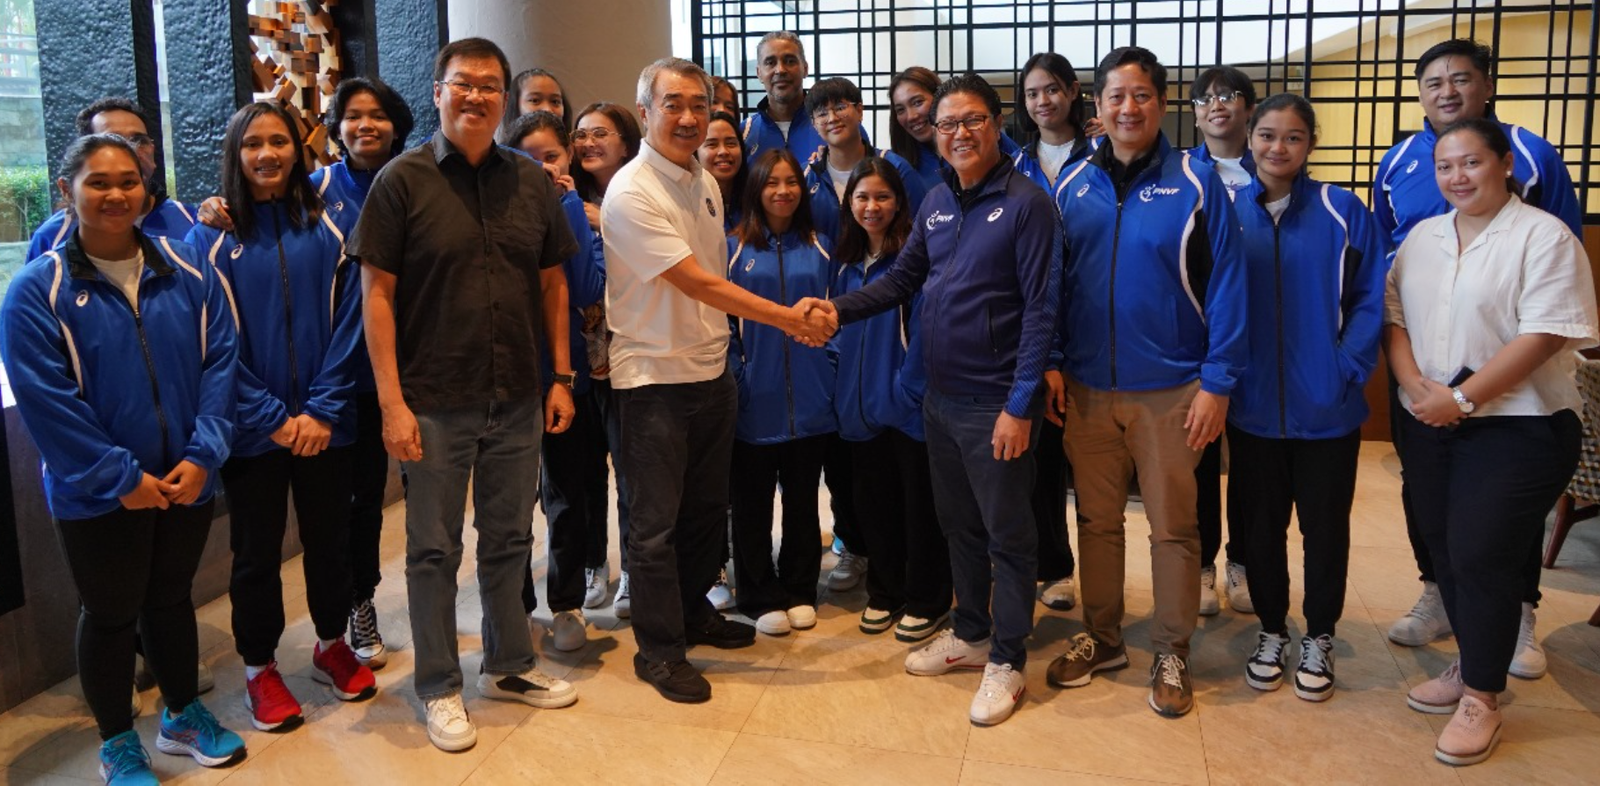 SM Prime Holdings chairman Hans Sy shakes hands with Philippine National Volleyball Federation (PNVF) president Ramon “Tats” Suzara. With them are PNVF secretary-general Donaldo Caringal, National University (NU) Lady Bulldogs team manager Engineer Mariano “Bing” See Diet, Brazilian coach Jorge Edson Souza de Brito, NU tactician Norman Miguel and members of the national team. [PNVF photo]